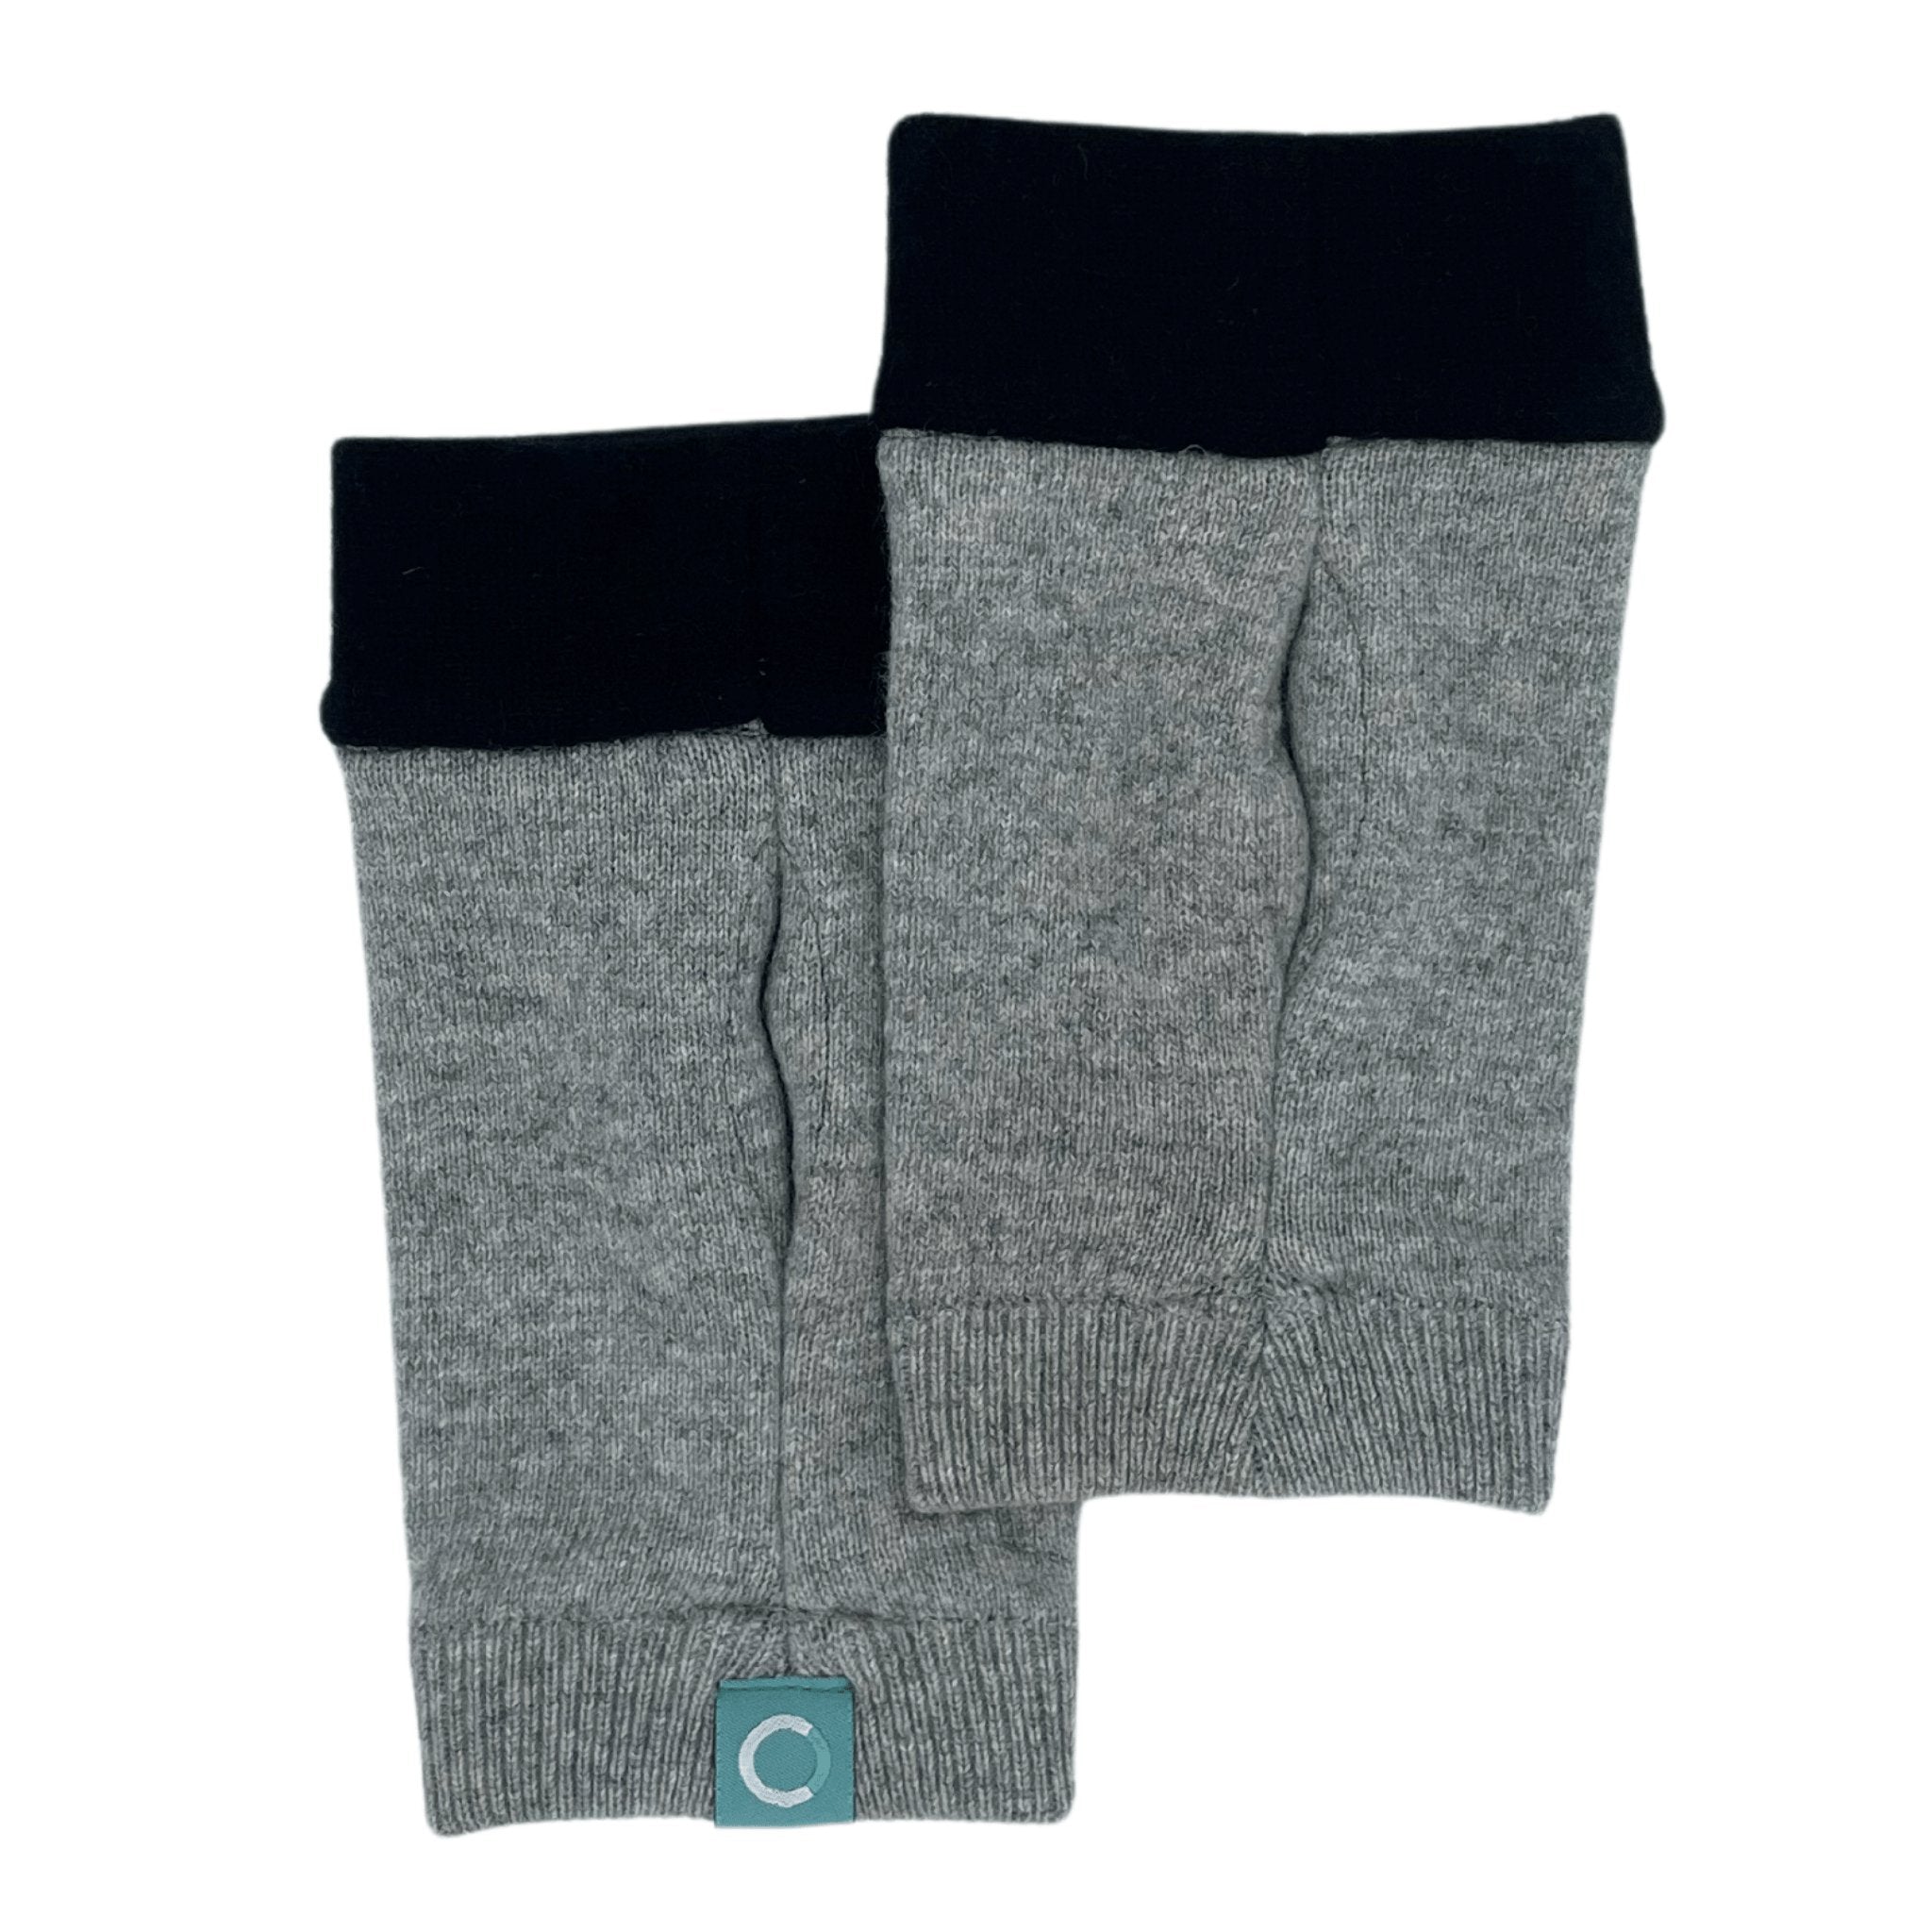 Recycled Cashmere Gloves | Men's - Grey/Black Tip - Cashmere Circle